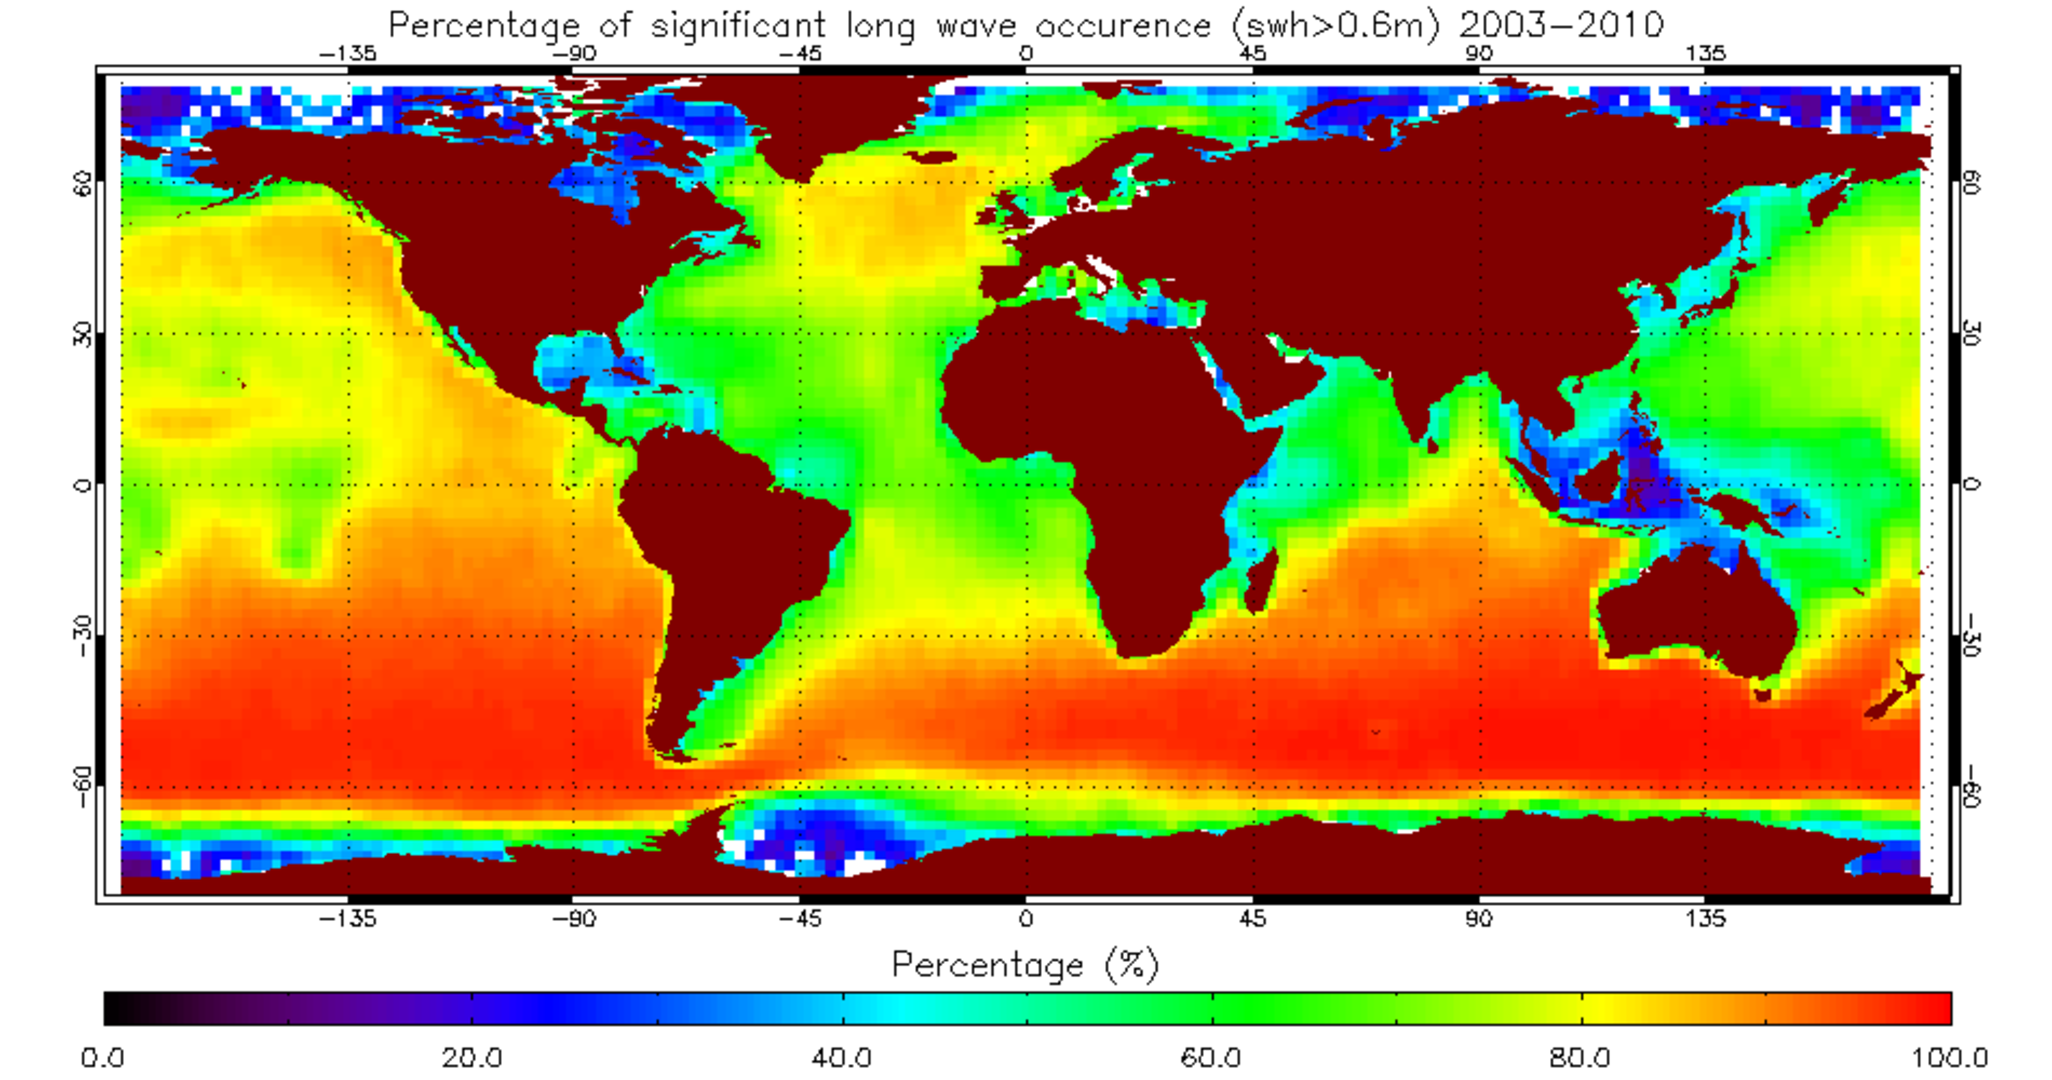 Global occurrence of long waves